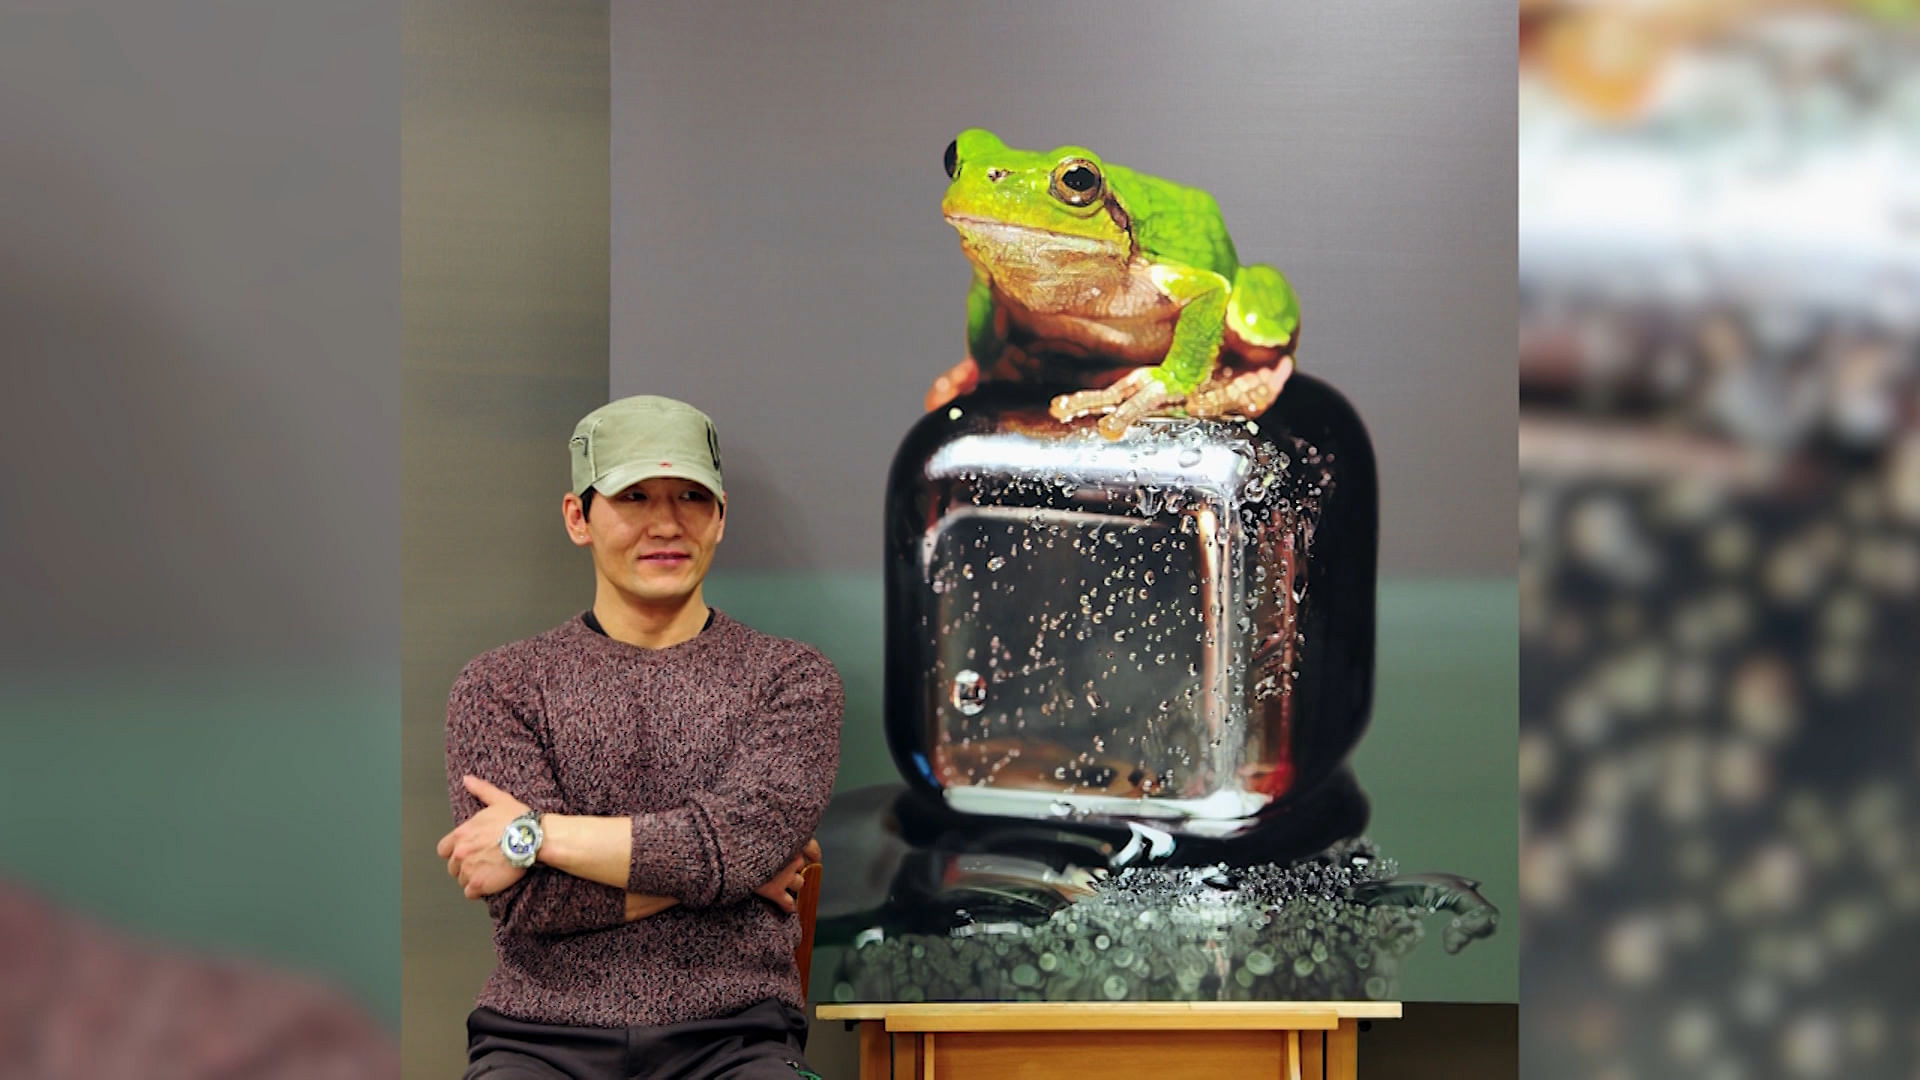 Veteran artist Young Sung Kim shuns the world with his hyper- realistic paintings